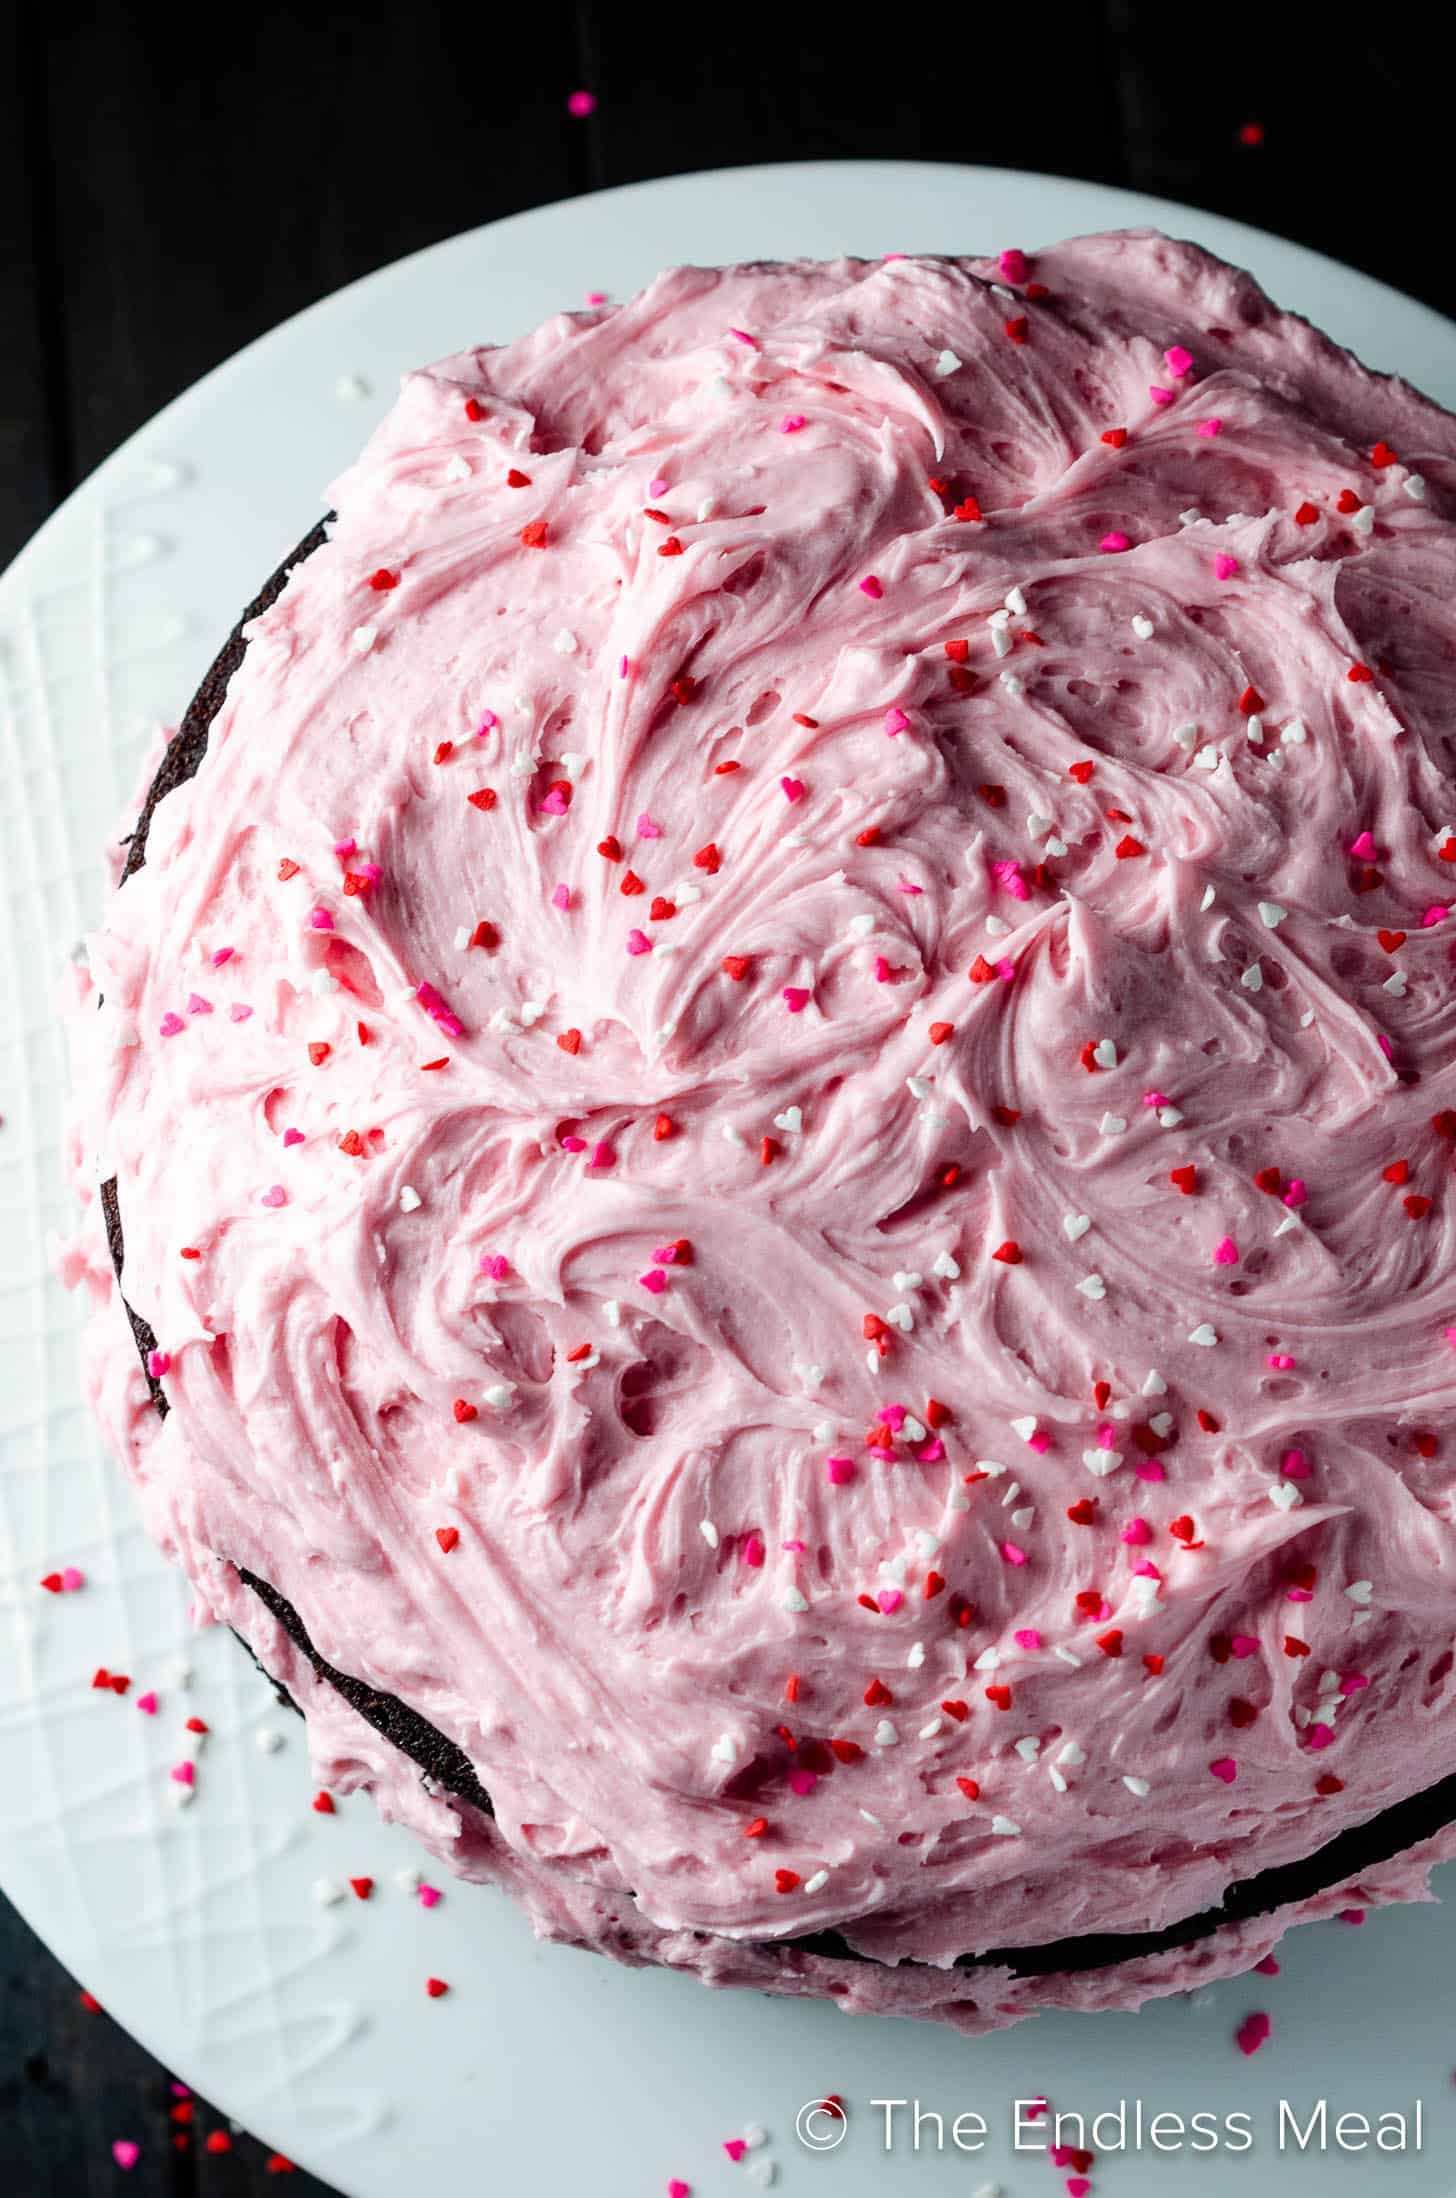 A close up of pink frosting on a beet chocolate cake